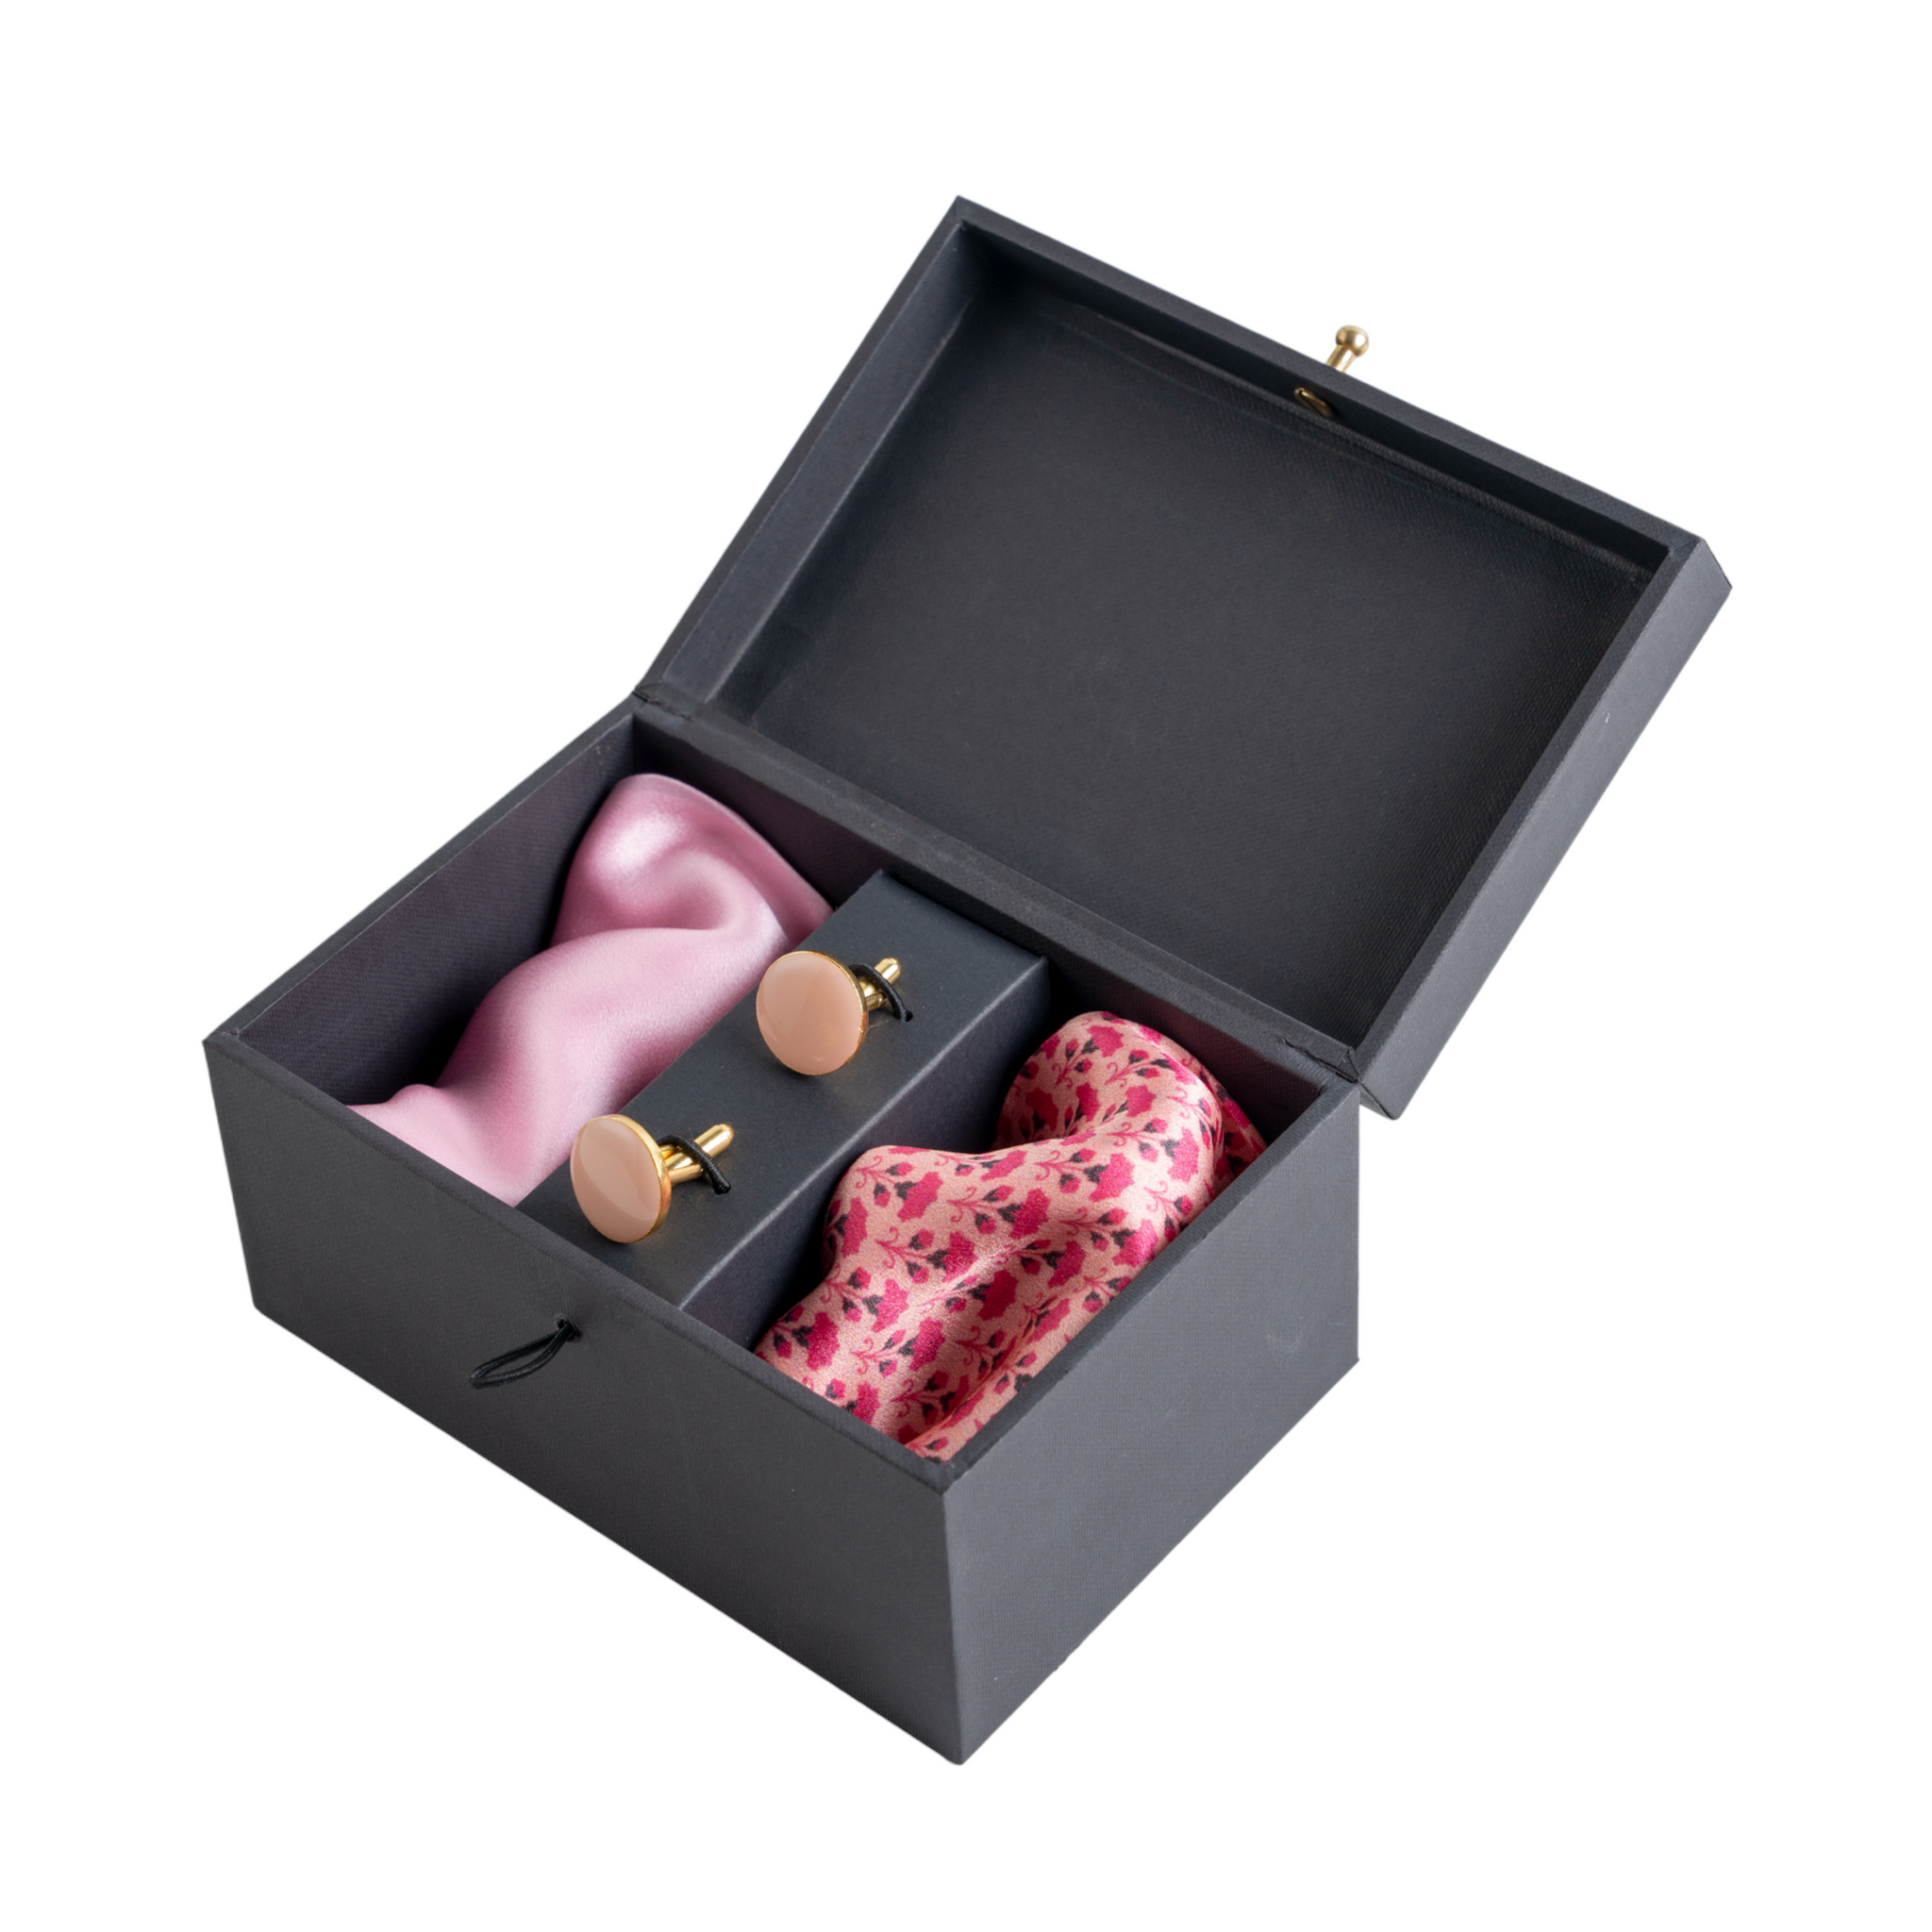 Chokore Special 3-in-1 Gift Set, Pink (2 Pocket Squares and Cufflinks)